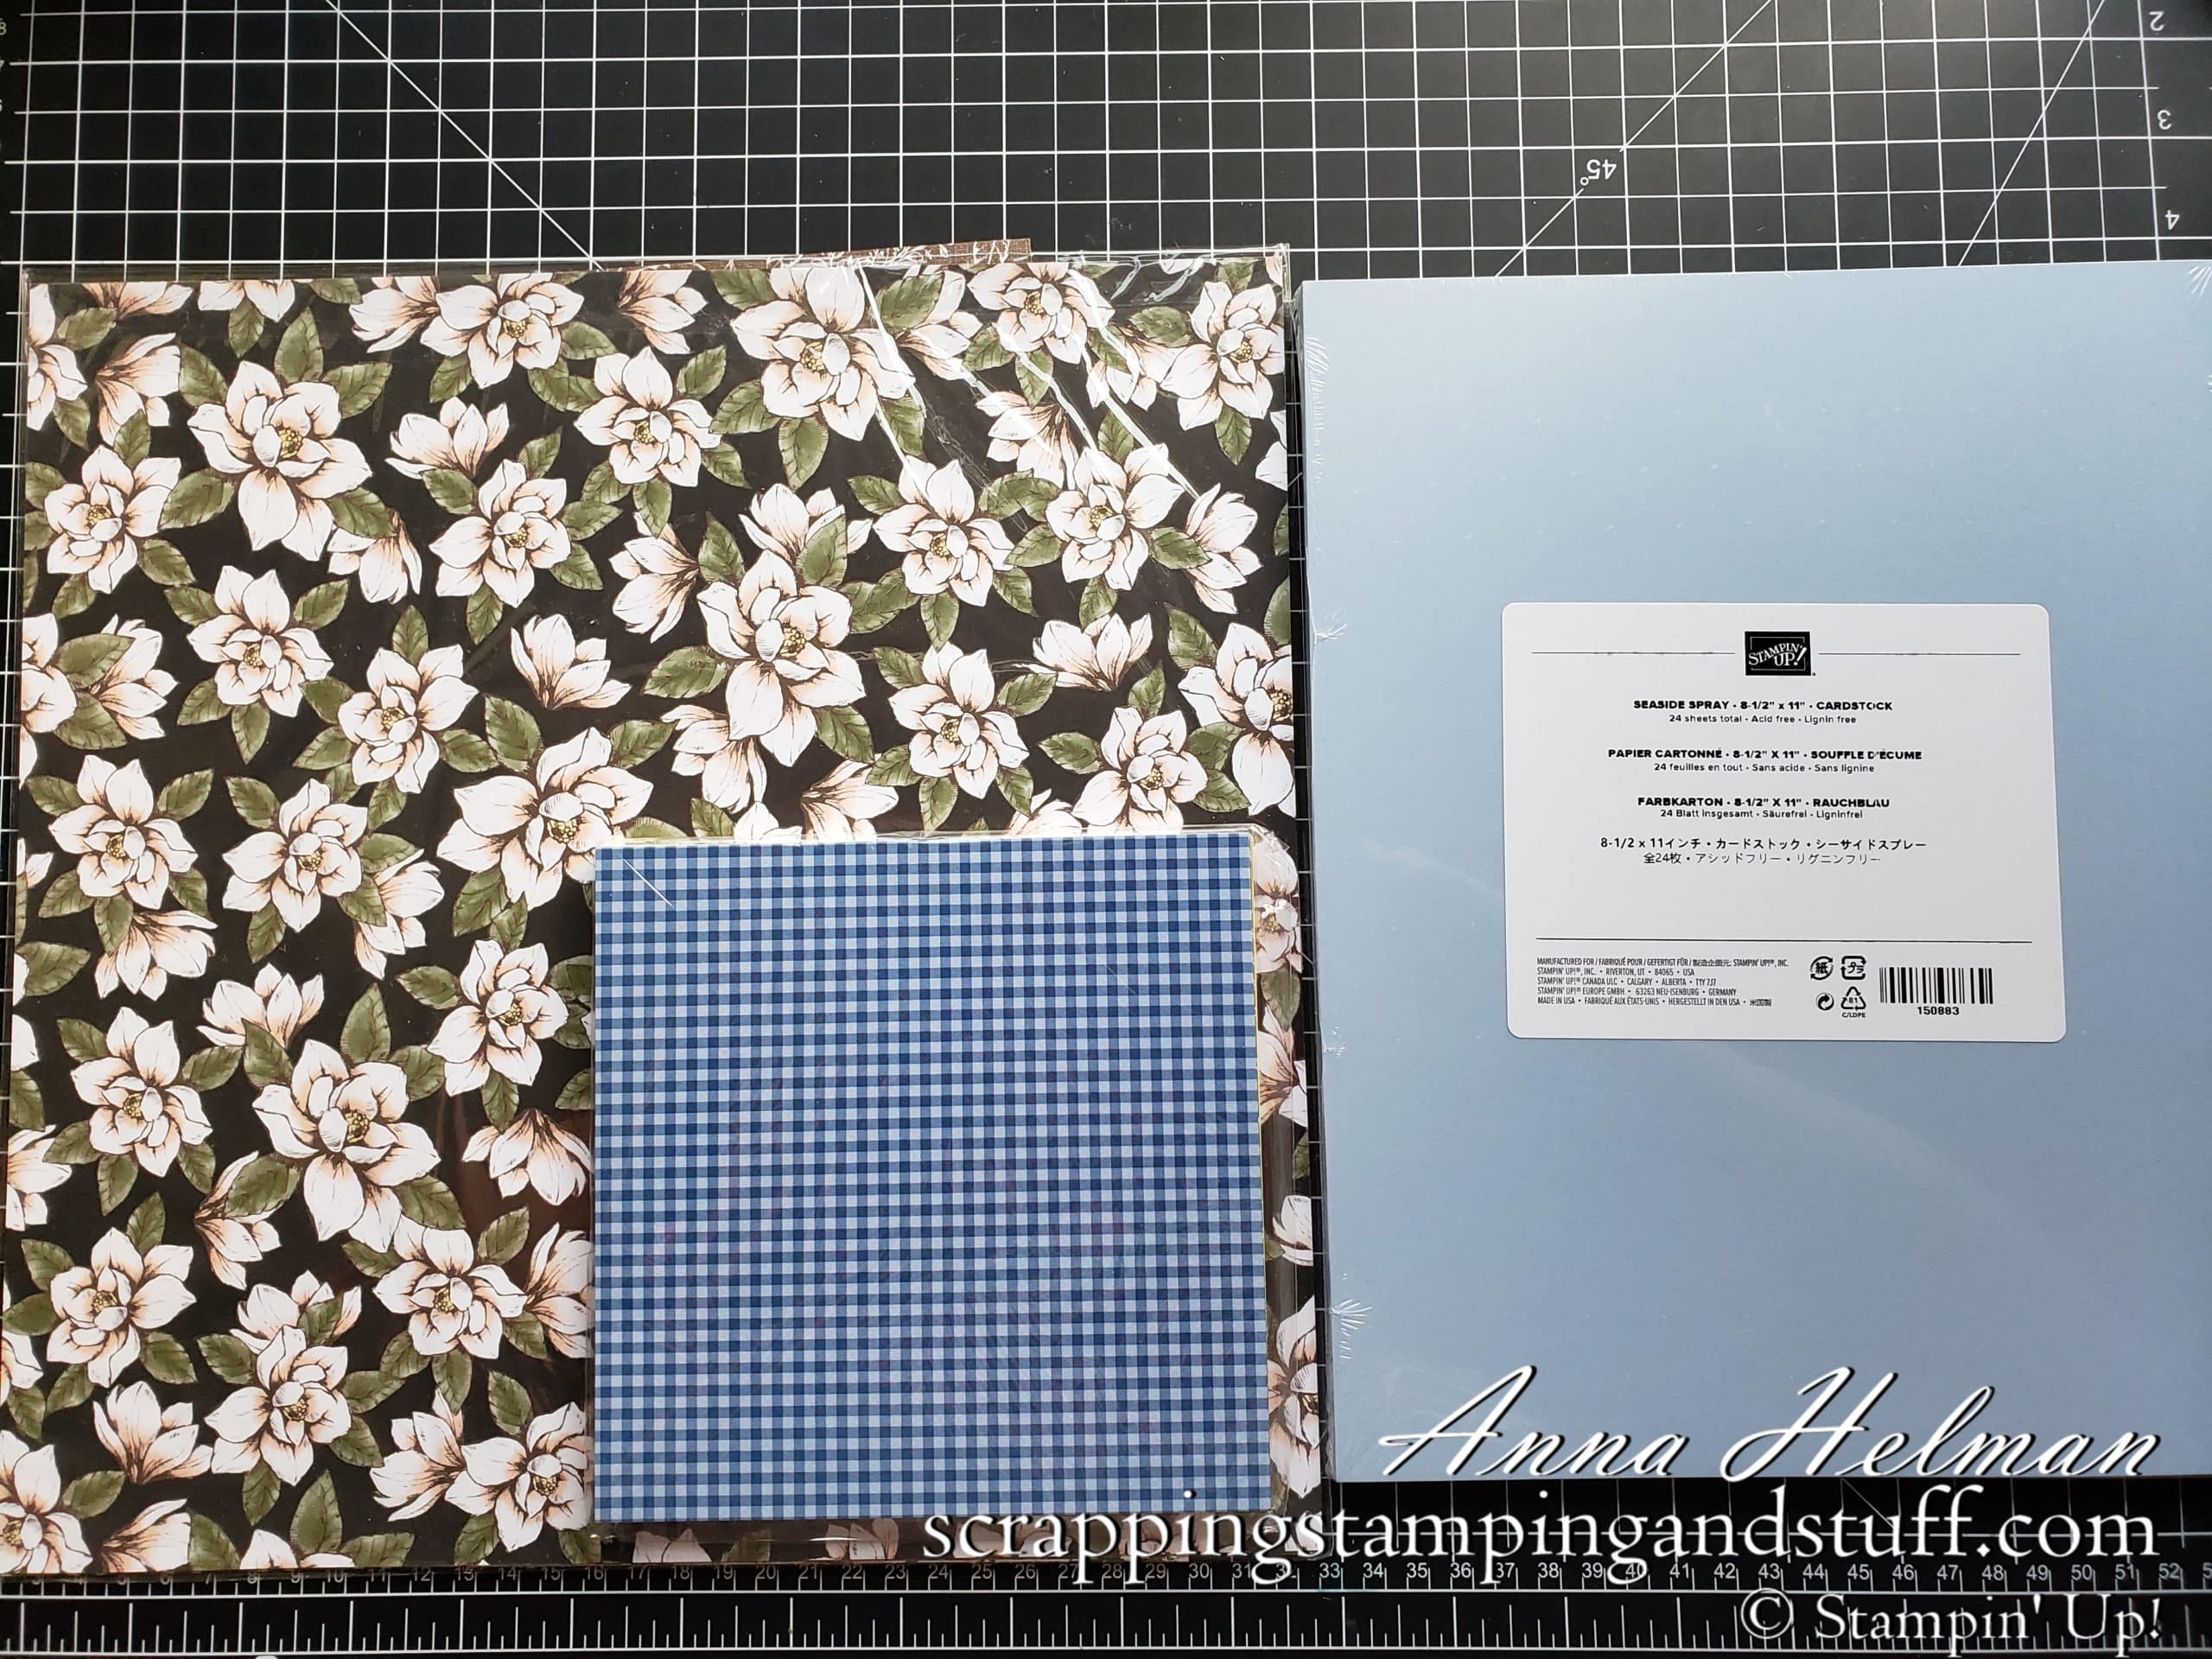 Cardmaking 101 Lesson 3: Paper and How to Prepare a Card Base